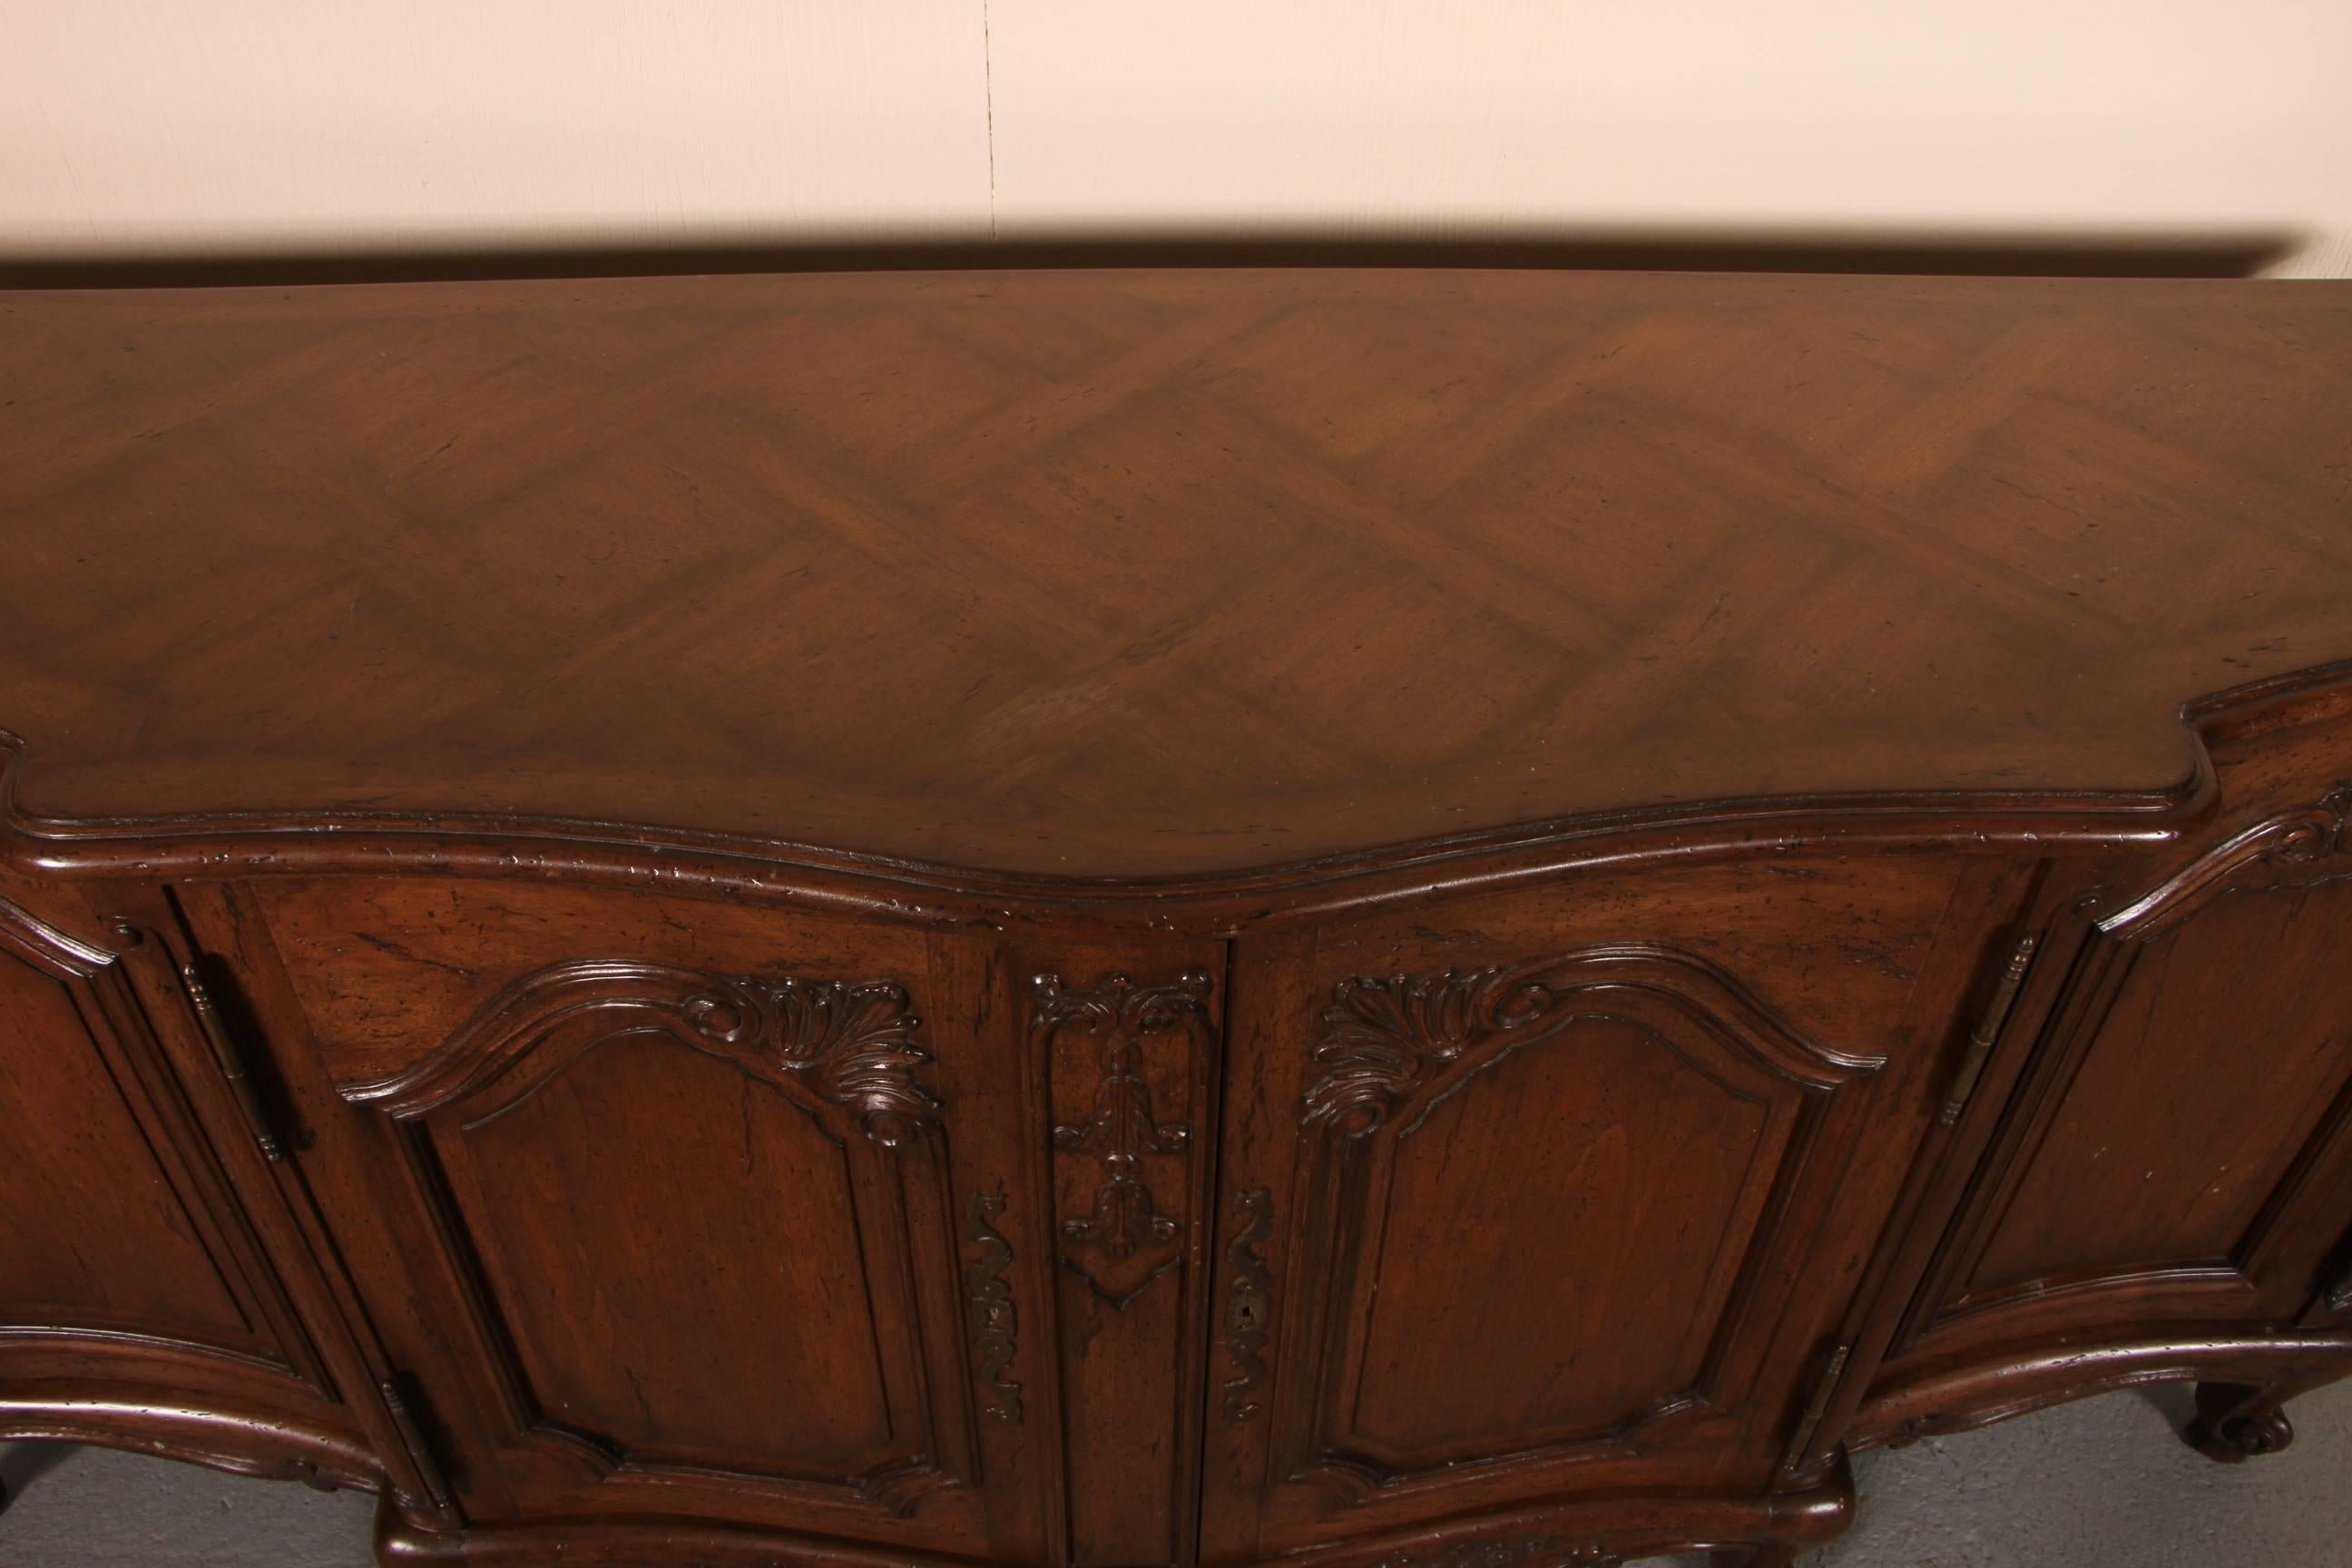 Quality deep stained Country French sideboard with parquetry top, raised snail's head foot, great traditional styling throughput, and intricate key escutcheons.